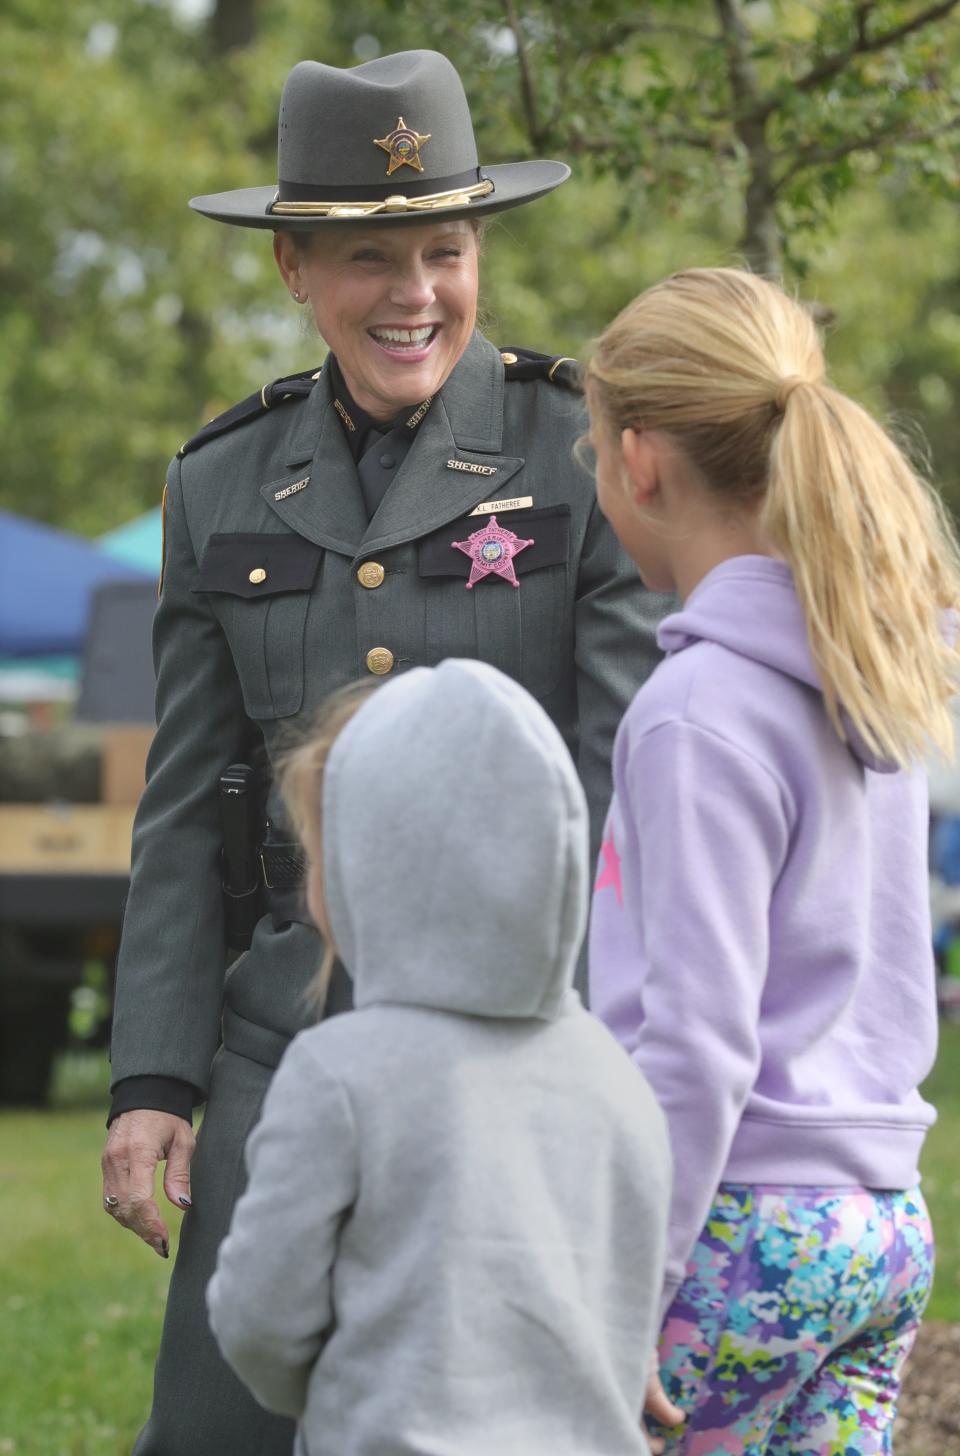 Summit County Sheriff Kandy Fatheree talks with Lennon Wiltrout, 4, and Raelyn Suggett, 9, during the Faith & Blue event on Saturday in Akron at Hardest Park.